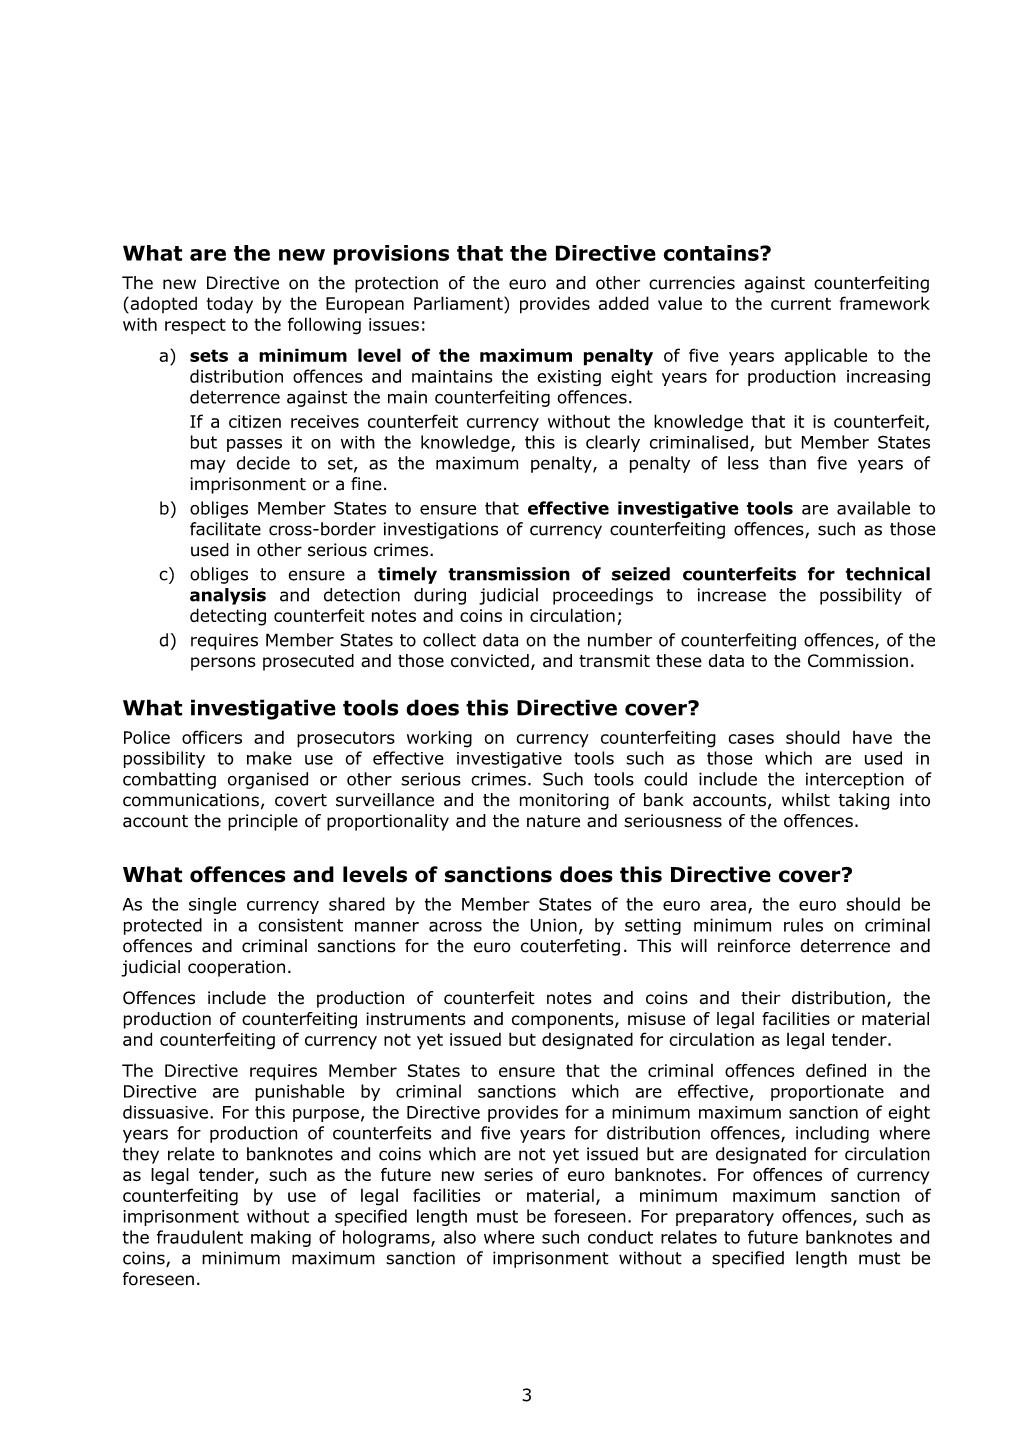 Frequently Asked Questions Protection Ofthe Euro and Other Currencies Against Counterfeiting